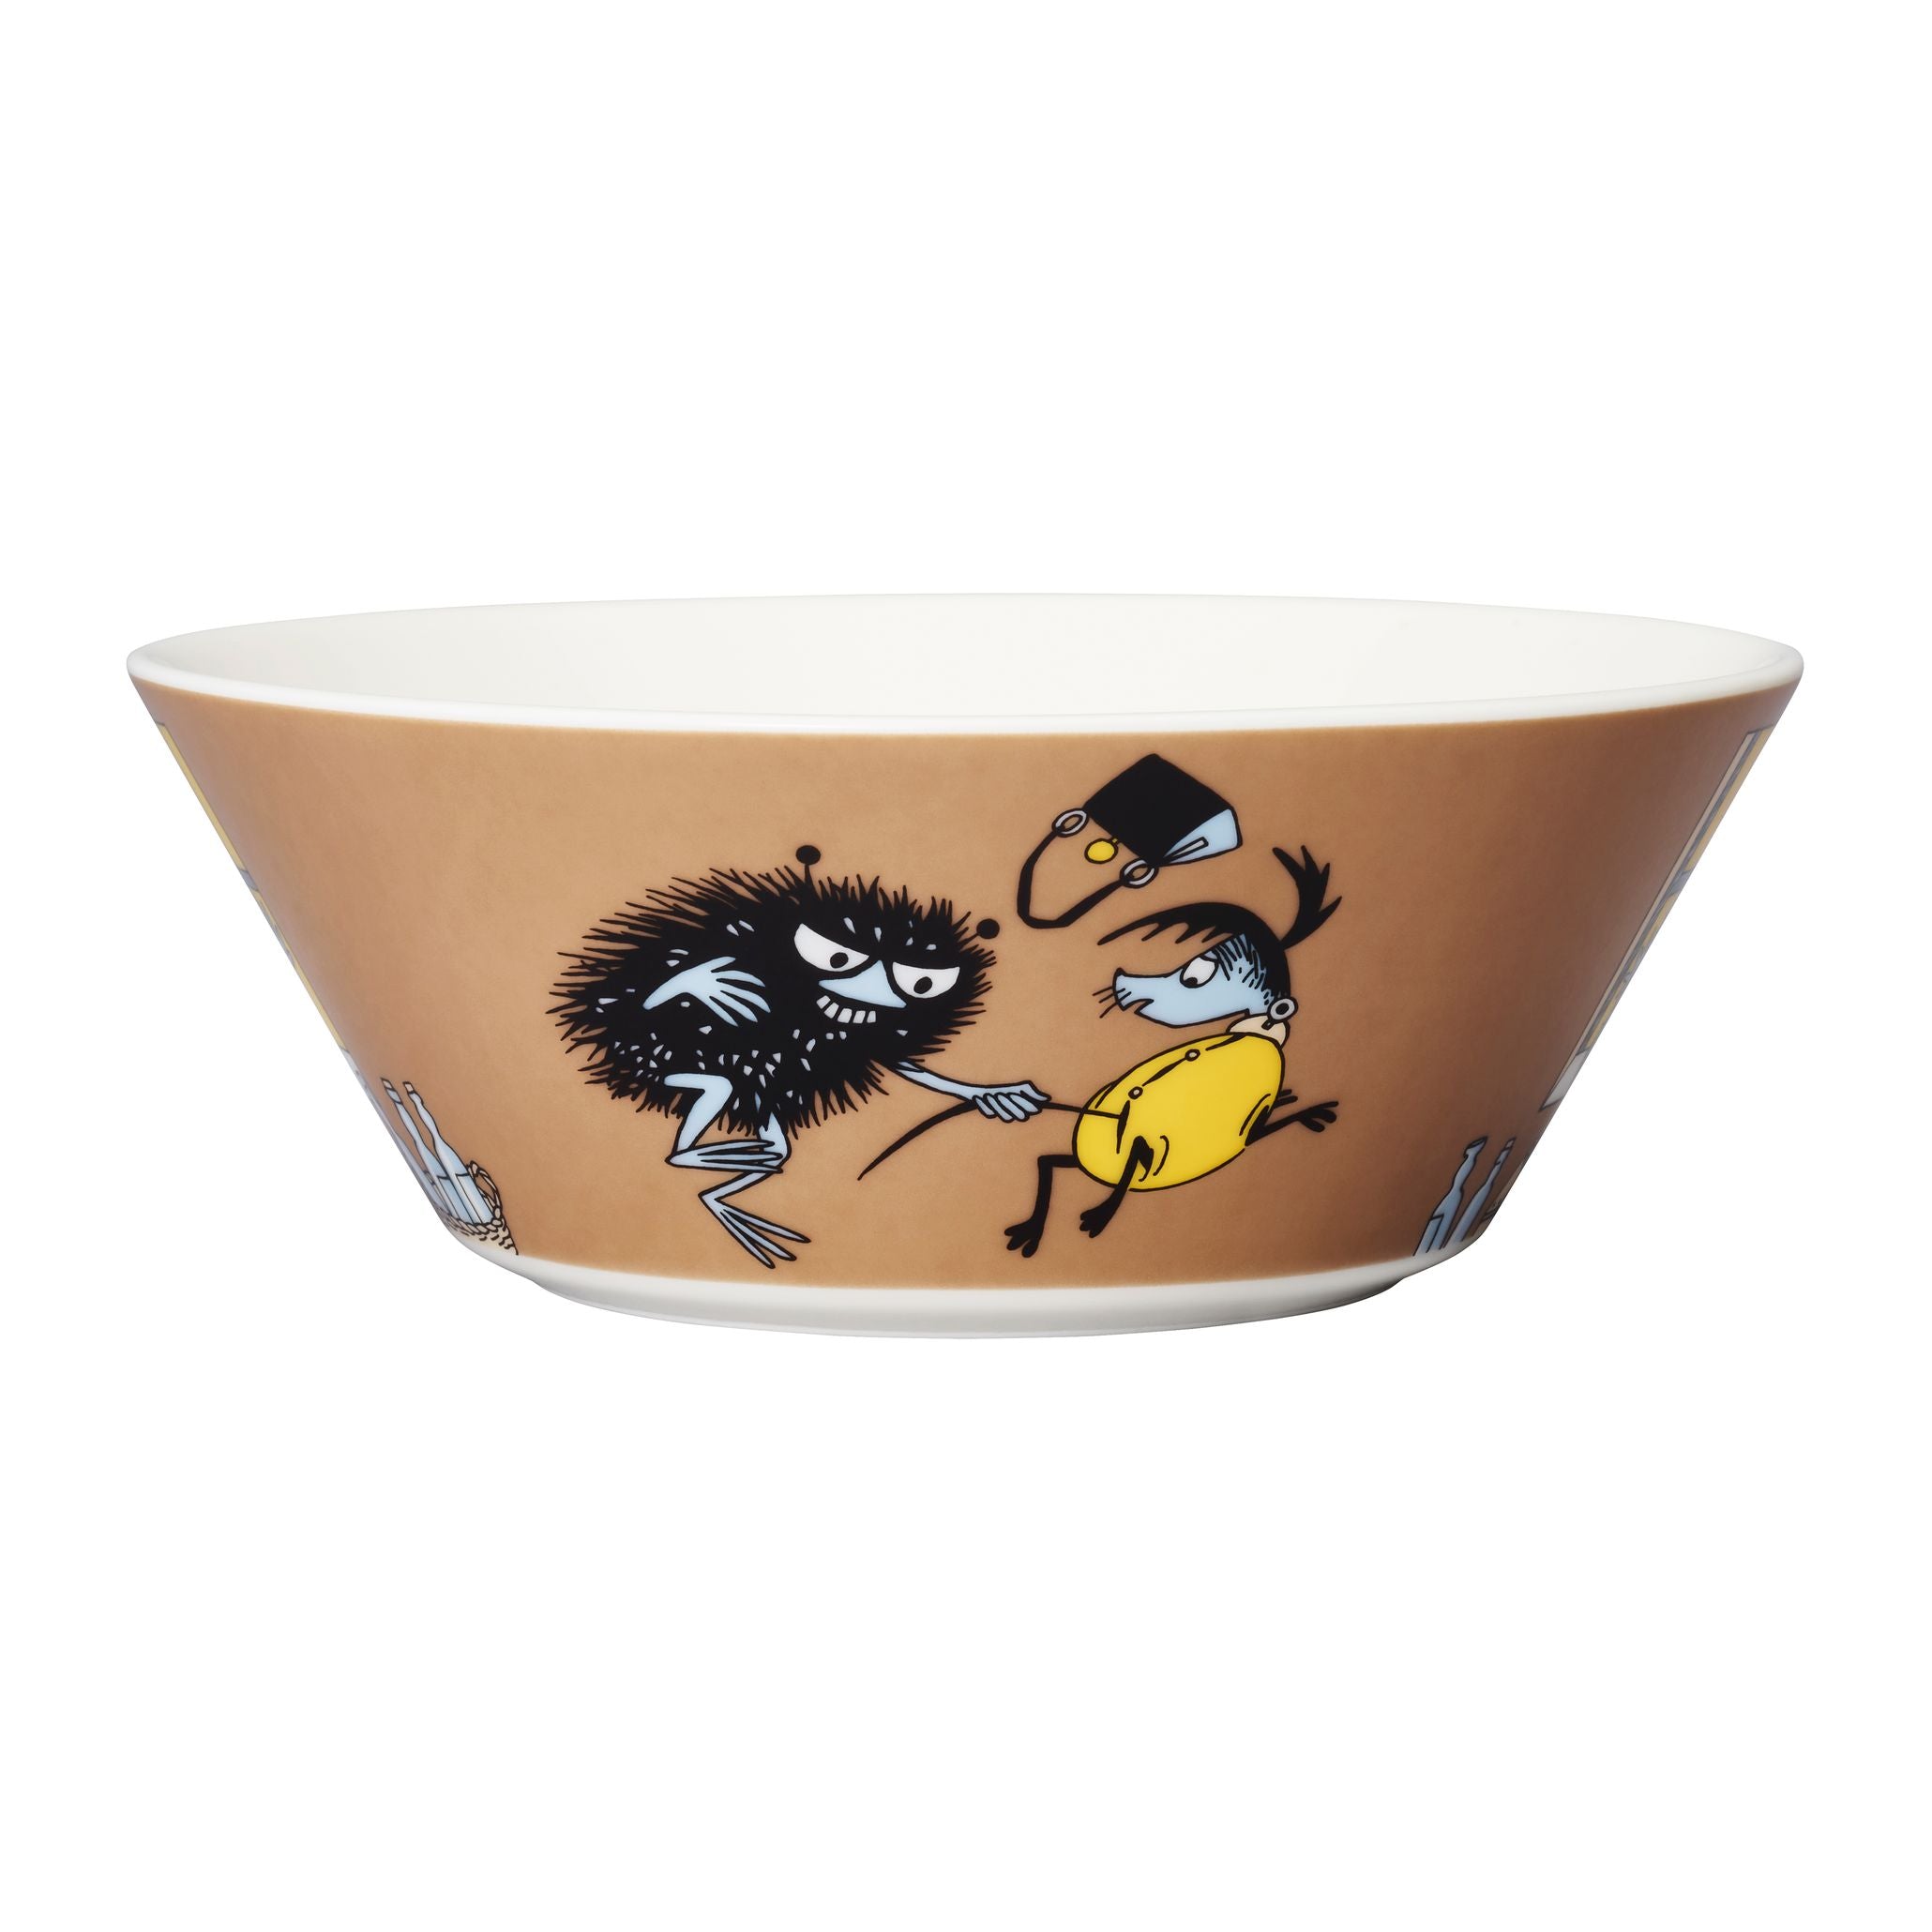 MOOMIN CLASSICS  Bowl 15cm / 6"  2022 Stinky in action